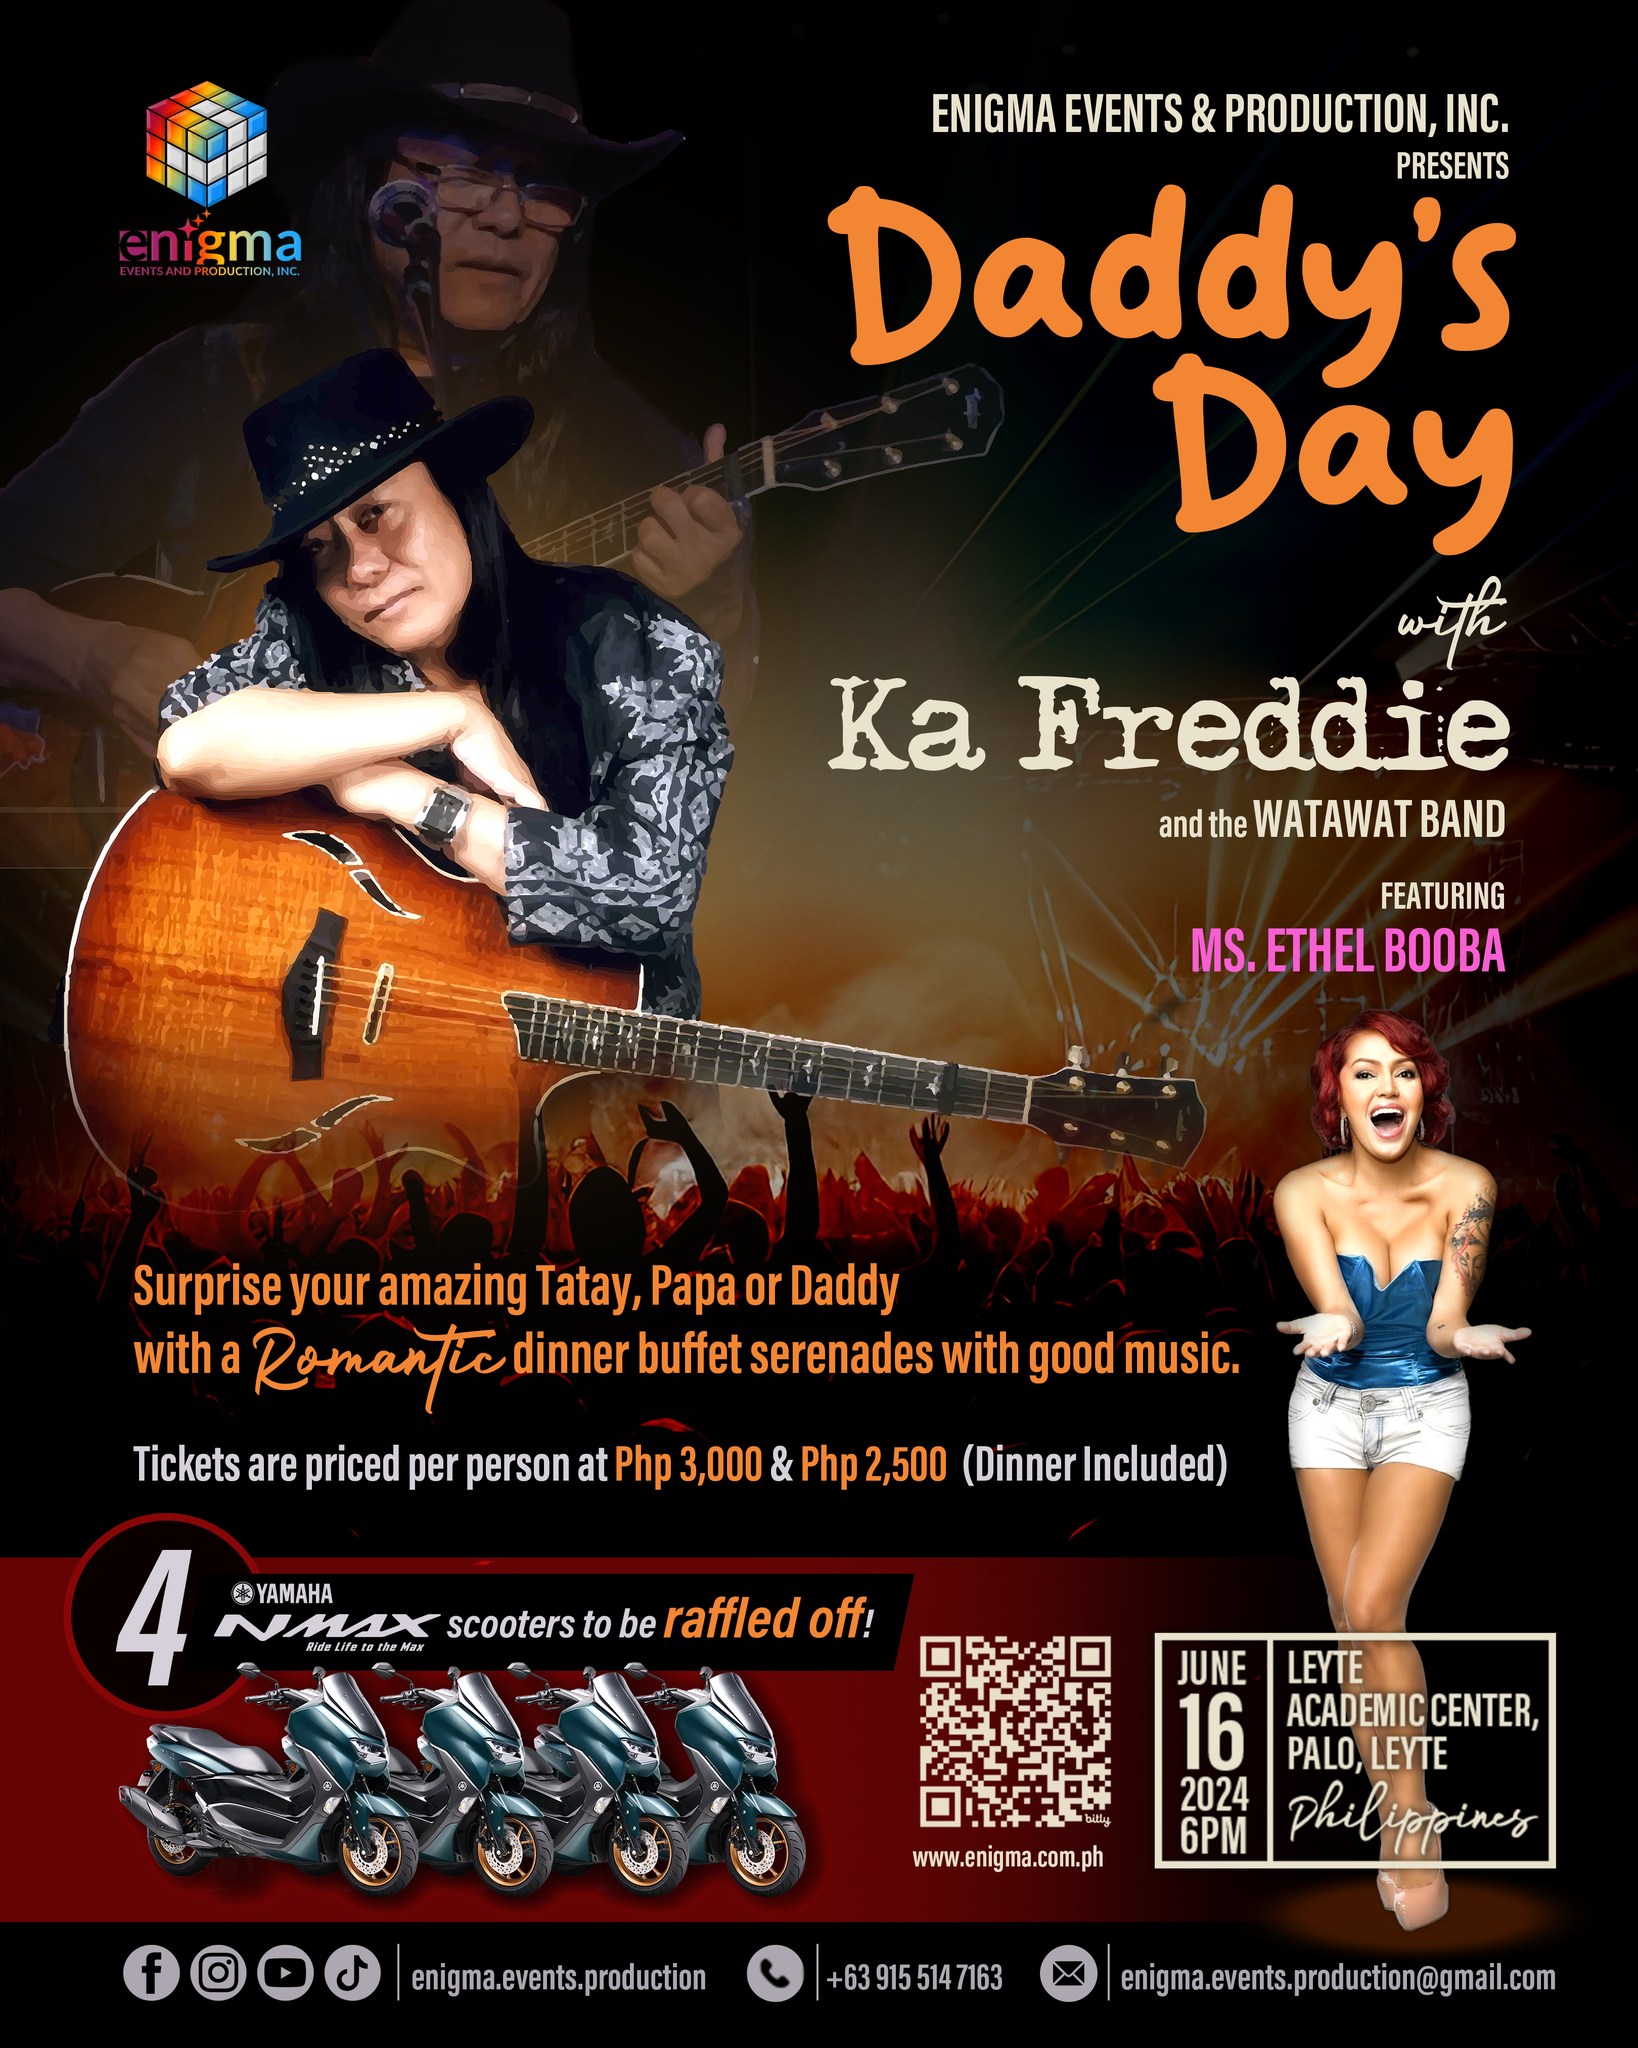 Daddy's Day with Ka Freddie and the Watawat Band Feat. Ms. Ethel Booba Event Poster